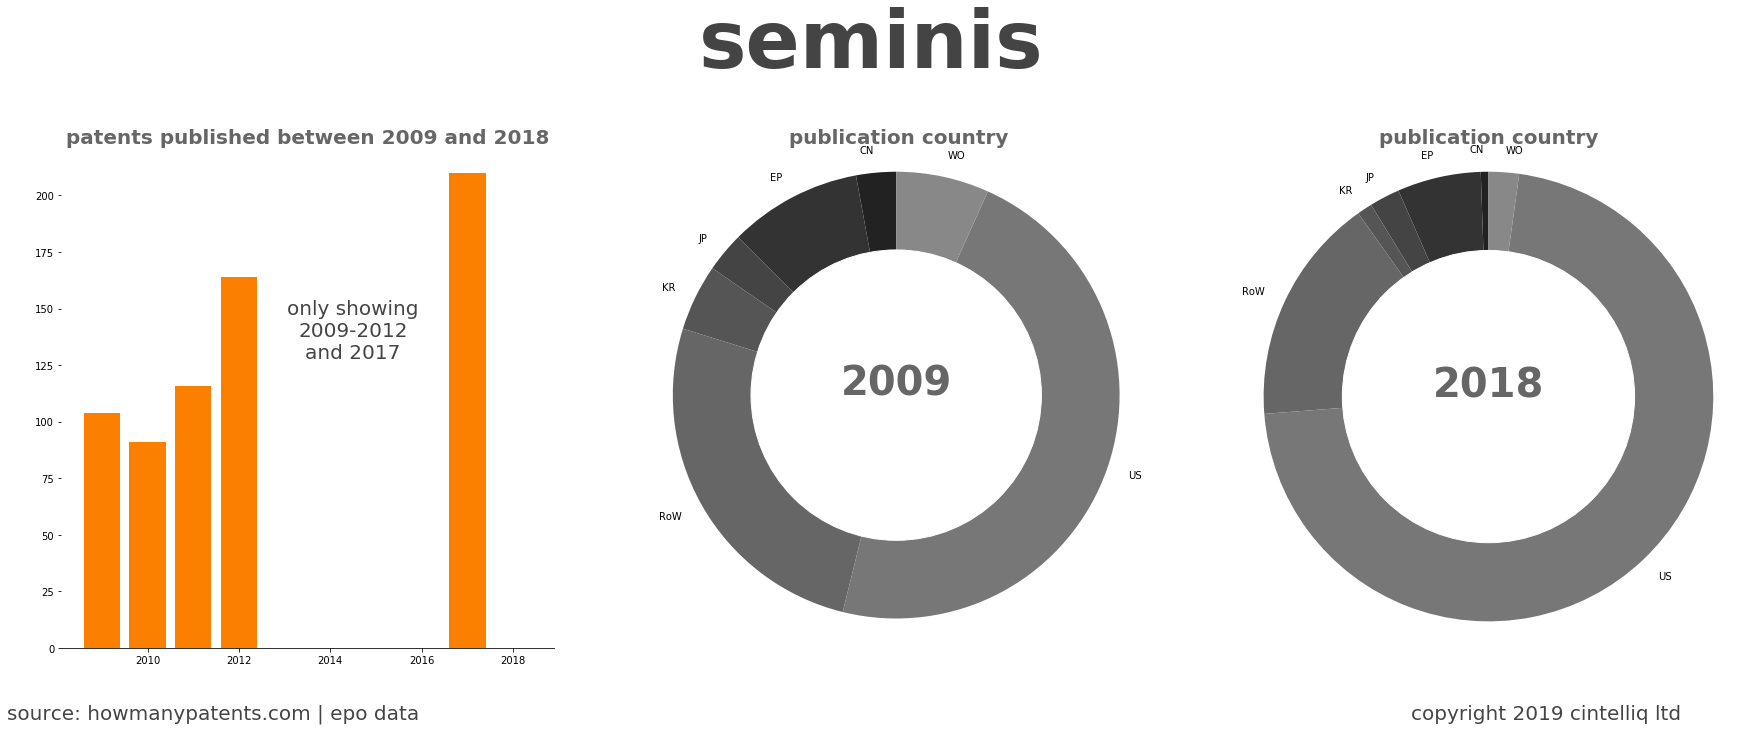 summary of patents for Seminis